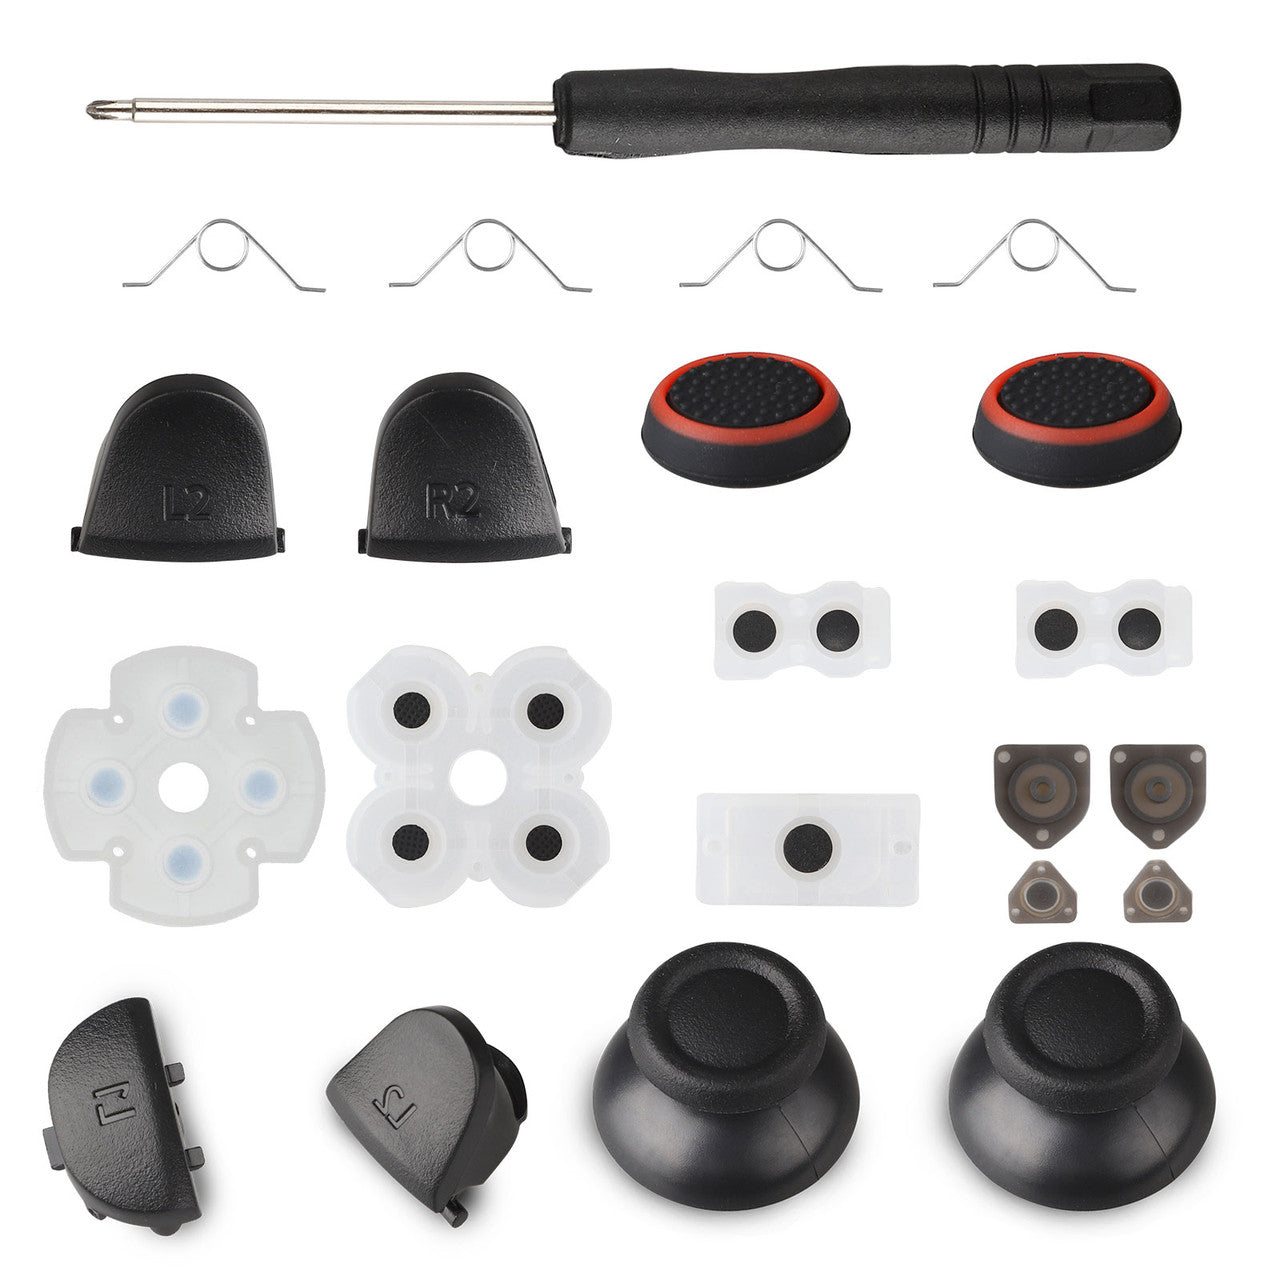 L2 R2 L1 R1 Conductive Buttons Rubber Replacement Repair Parts Conductive Rubber Pads Perfectly Fit for Sony Playstation 4 PS4 Controller w/ Joystick Silicone Caps + Mushroom Caps and more